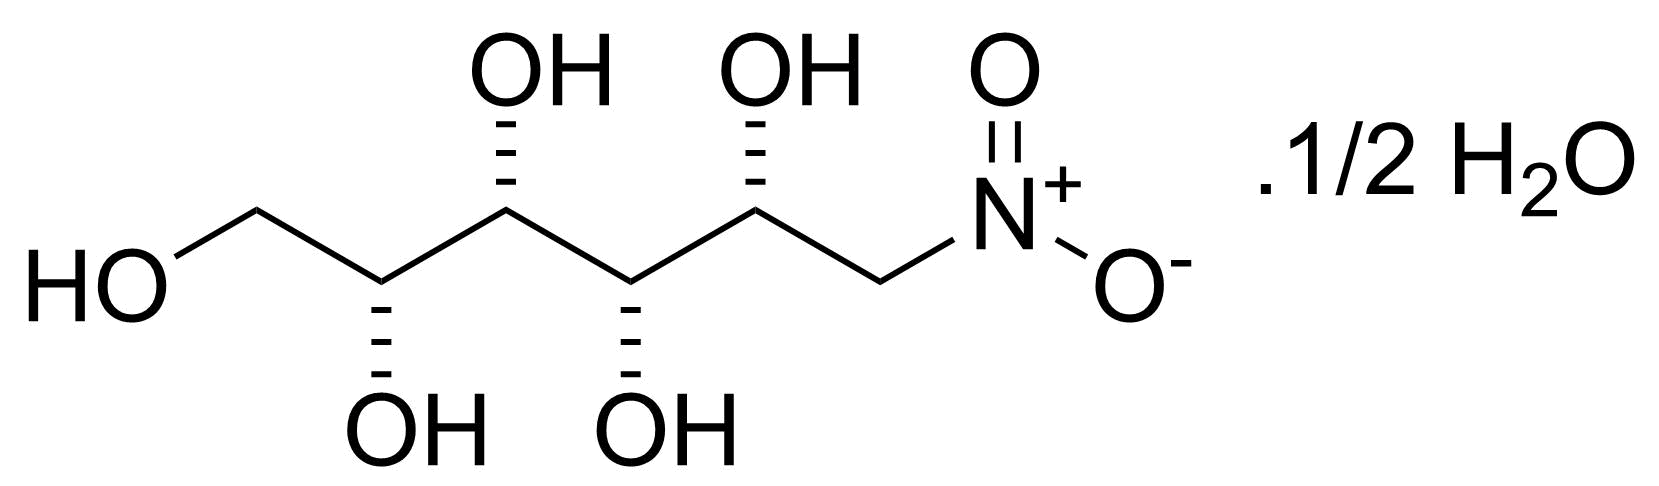 Structure of 1-Deoxy-1-nitro-L-iditol hemihydrate